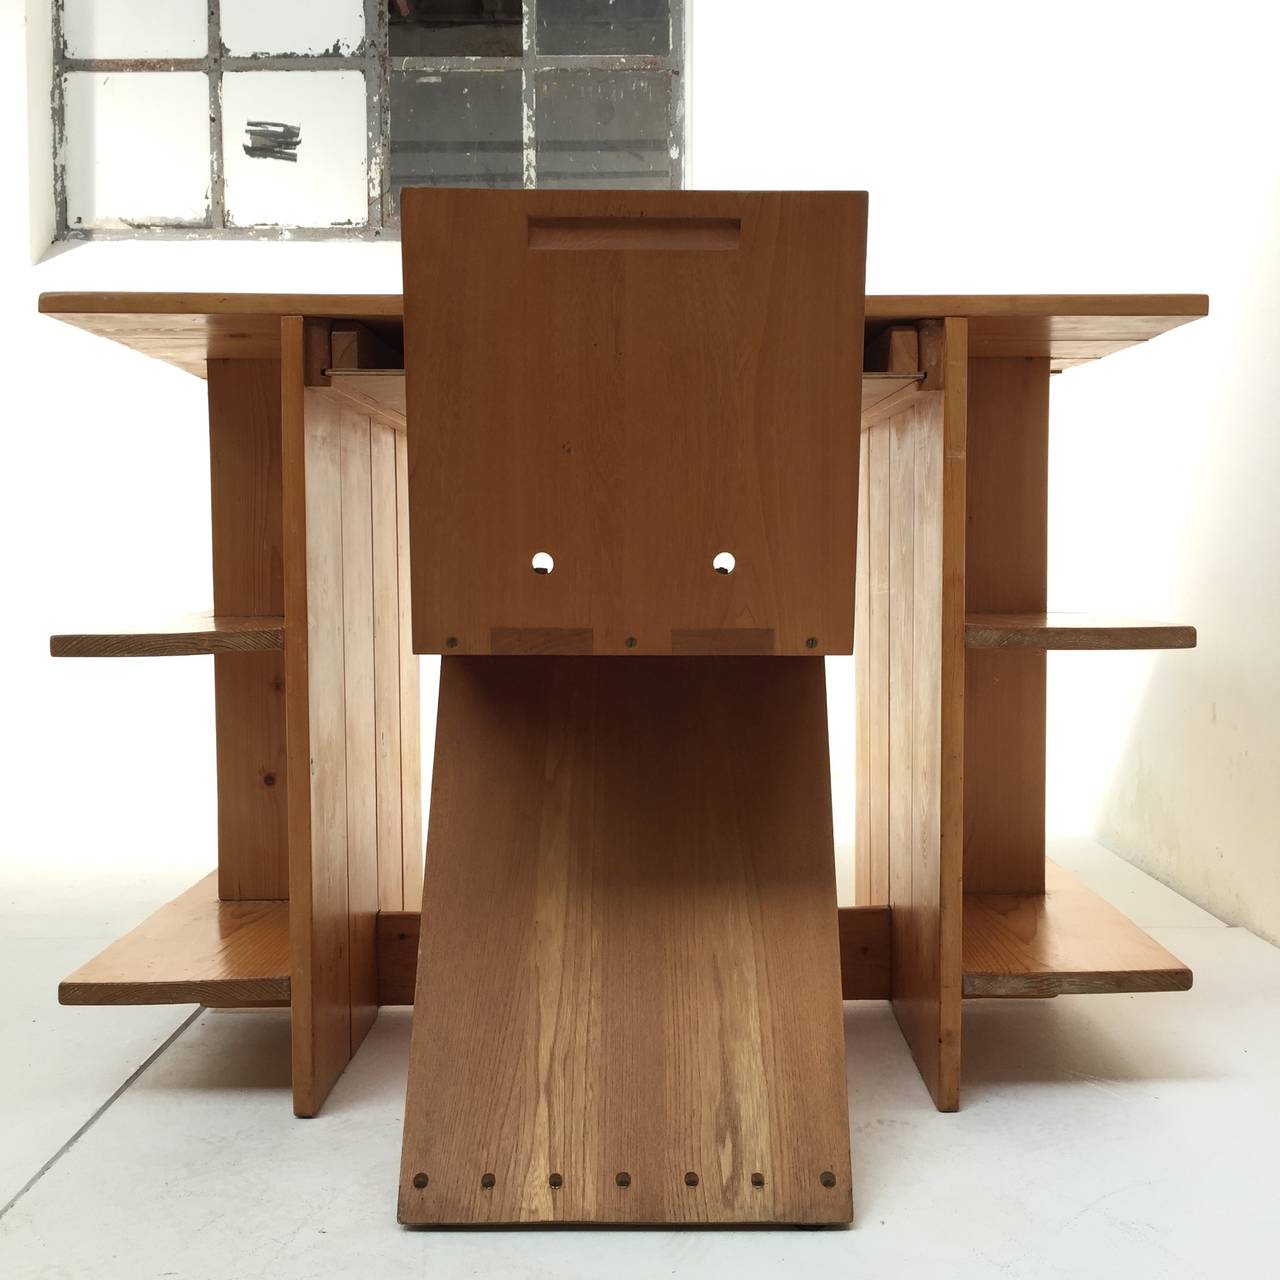 Rare crate desk by Gerrit Rietveld by Metz & Co, 1950s.

Since 1935 Metz & Co sold the progressive 'Crate furniture' of which this modernist desk is an perfect example.
With Rietveld’s choice for standardized pine board's modern furniture was now